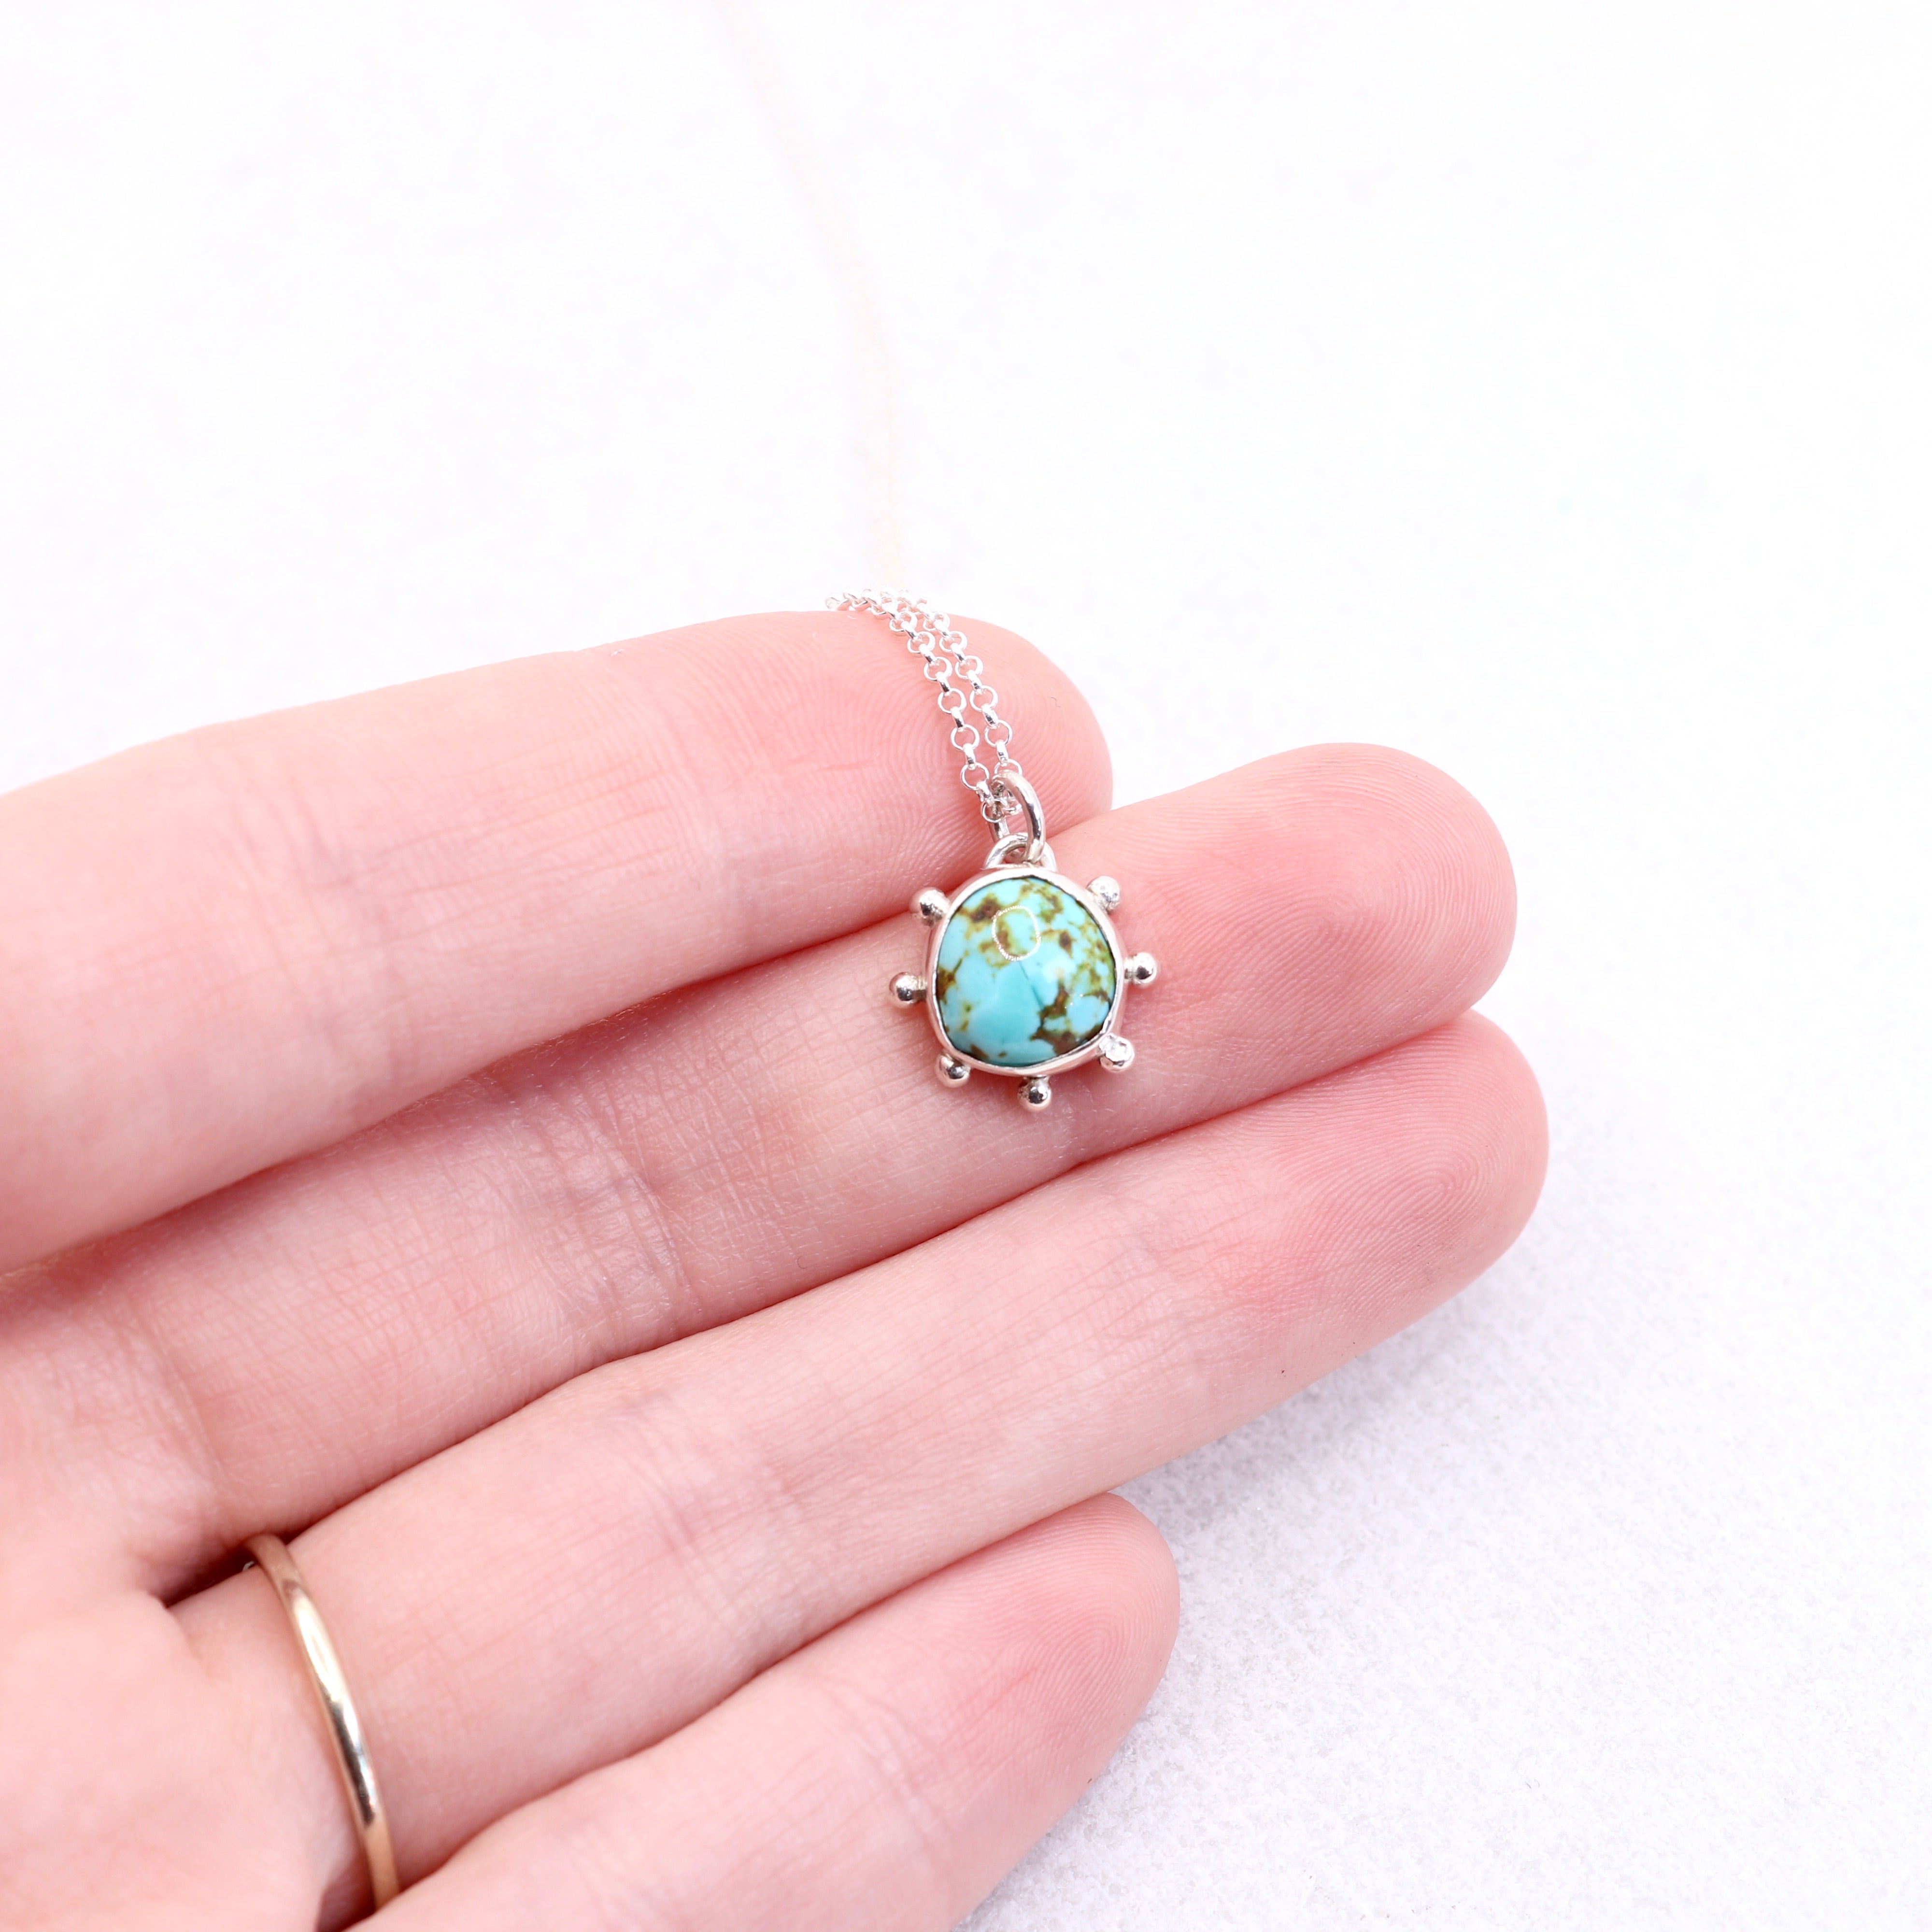 Sierra Nevada Turquoise | Sun Relic Necklace